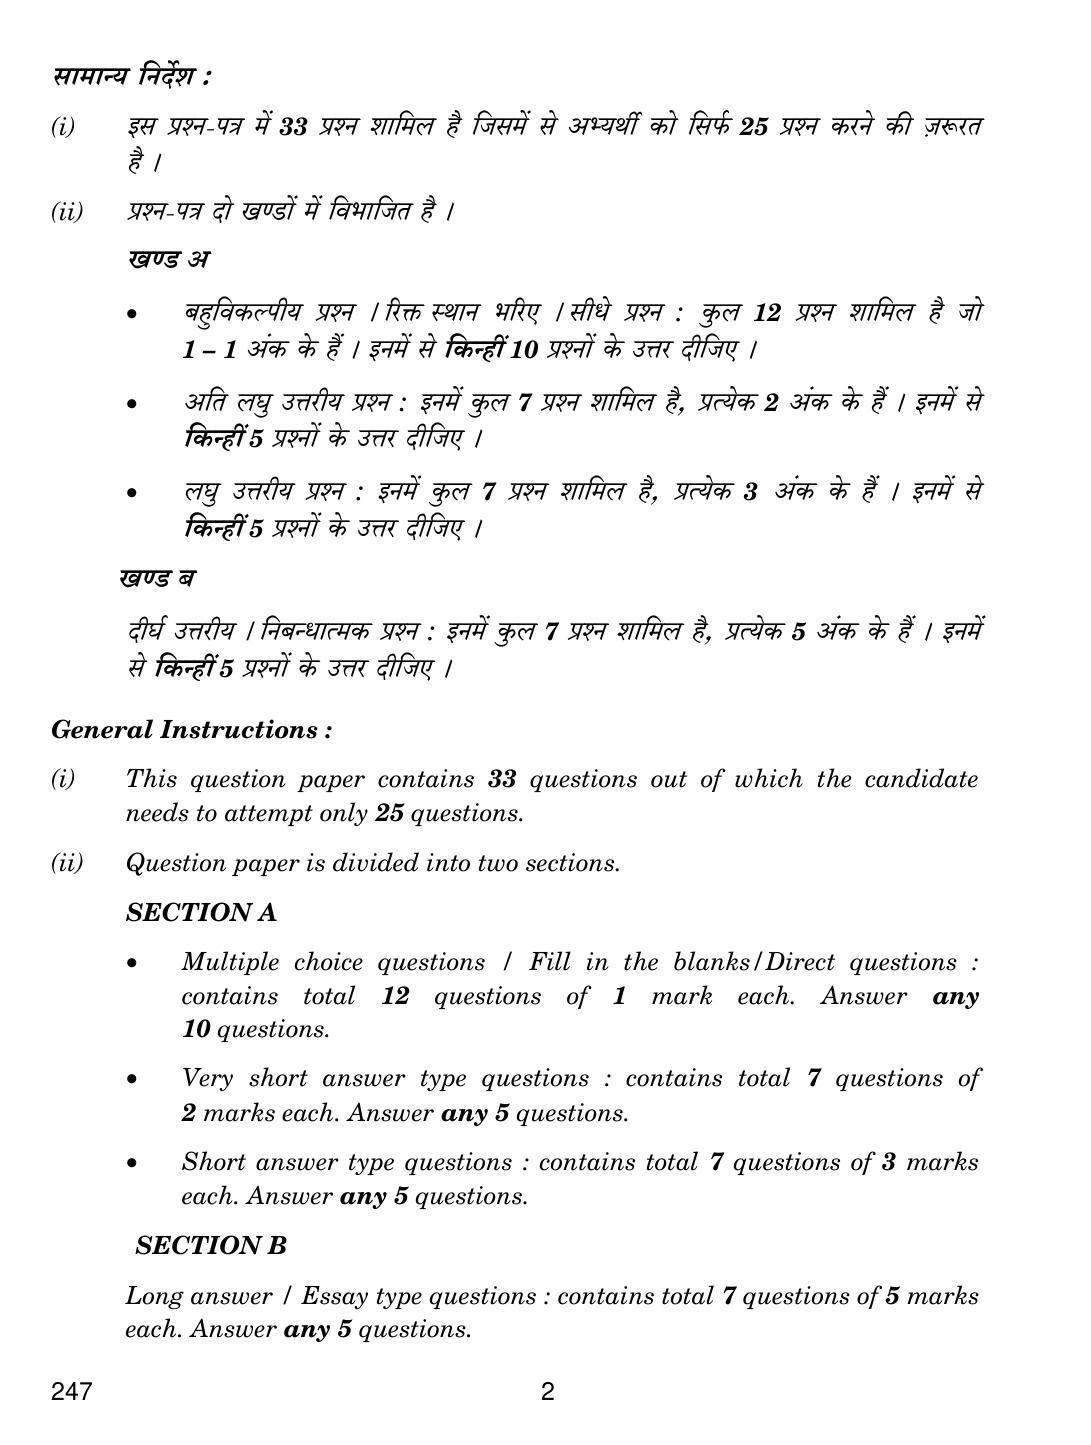 CBSE Class 12 247 Geospatial Technology 2019 Question Paper - Page 2